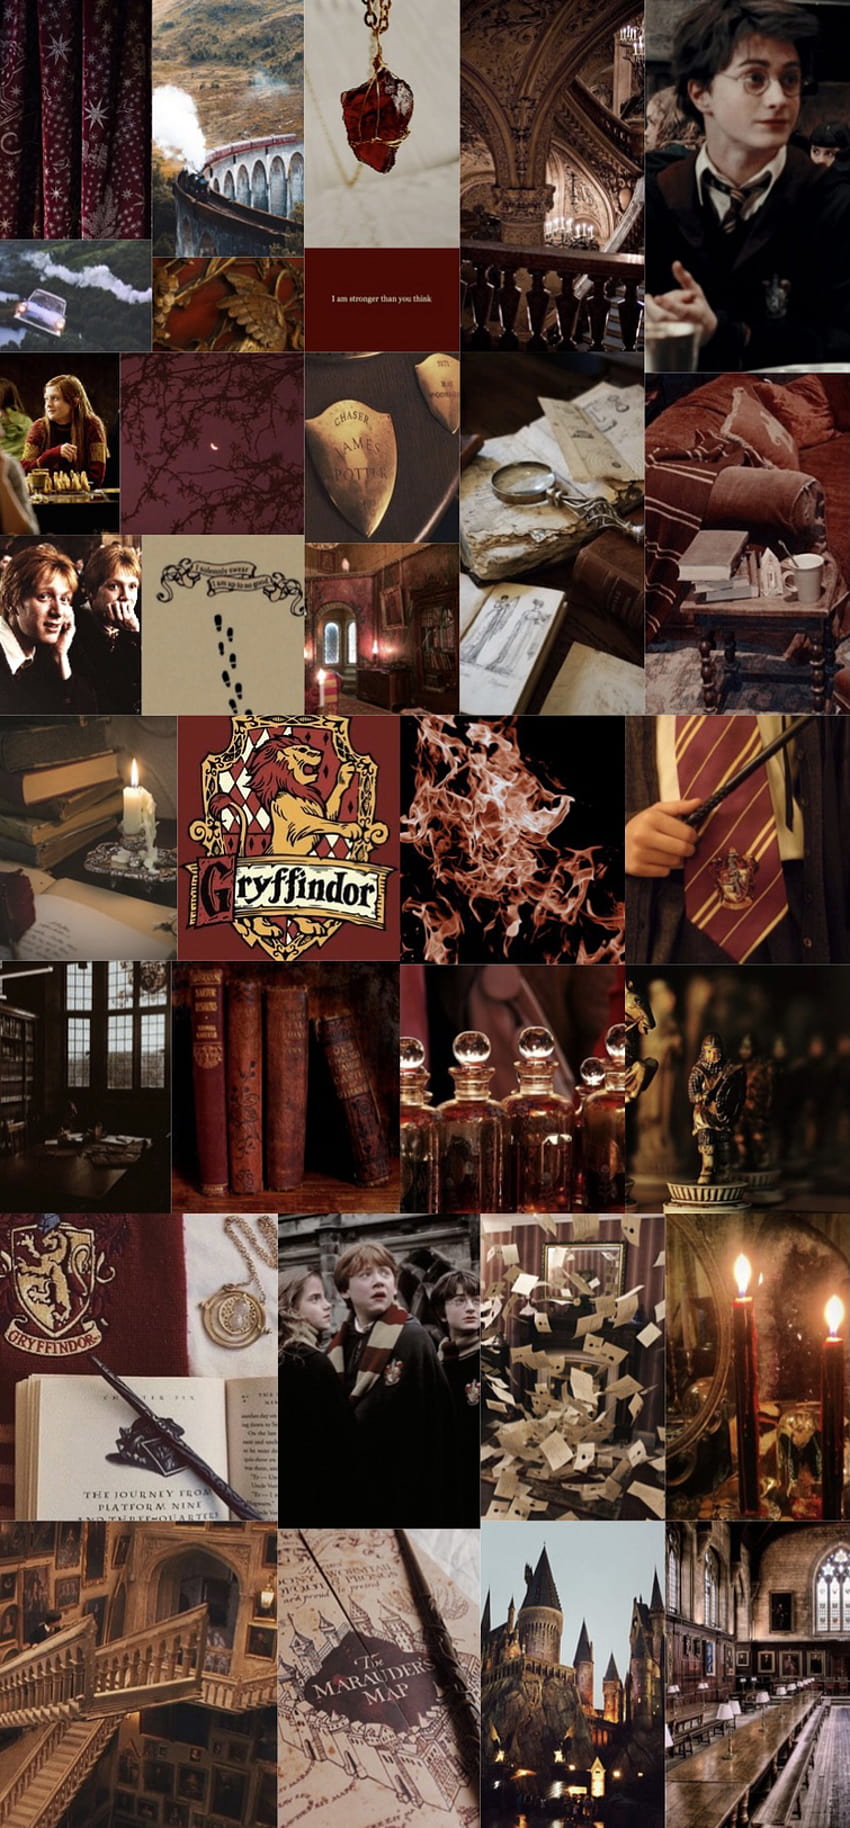 Aesthetic Harry Potter Gryffindor wallpaper phone background pictures photos collage aesthetic pictures photos collage. - Gryffindor